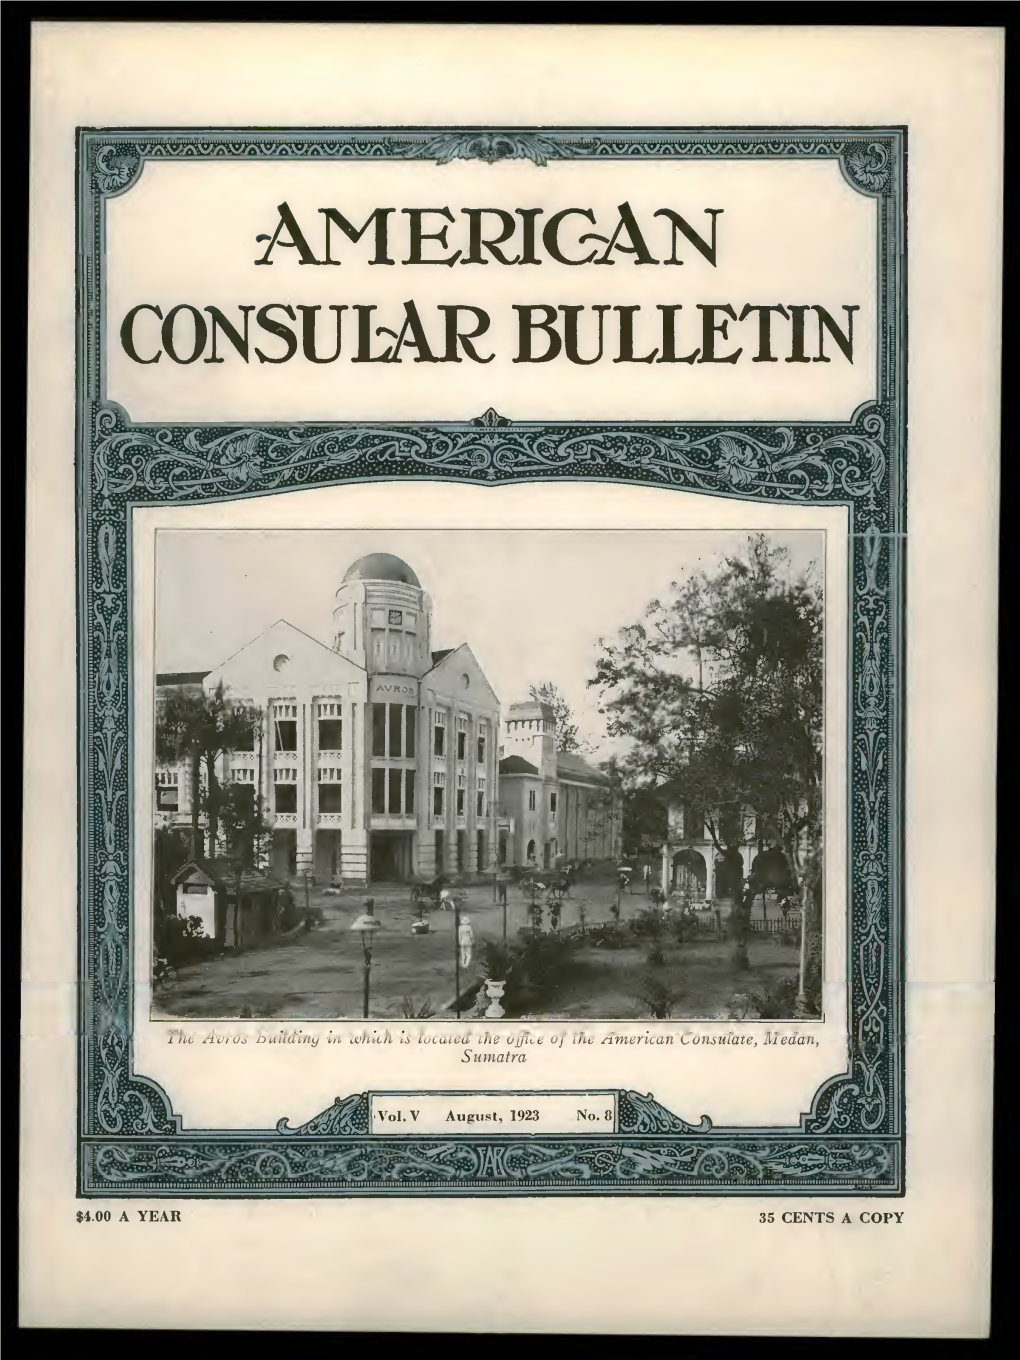 The Foreign Service Journal, August 1923 (American Consular Bulletin)